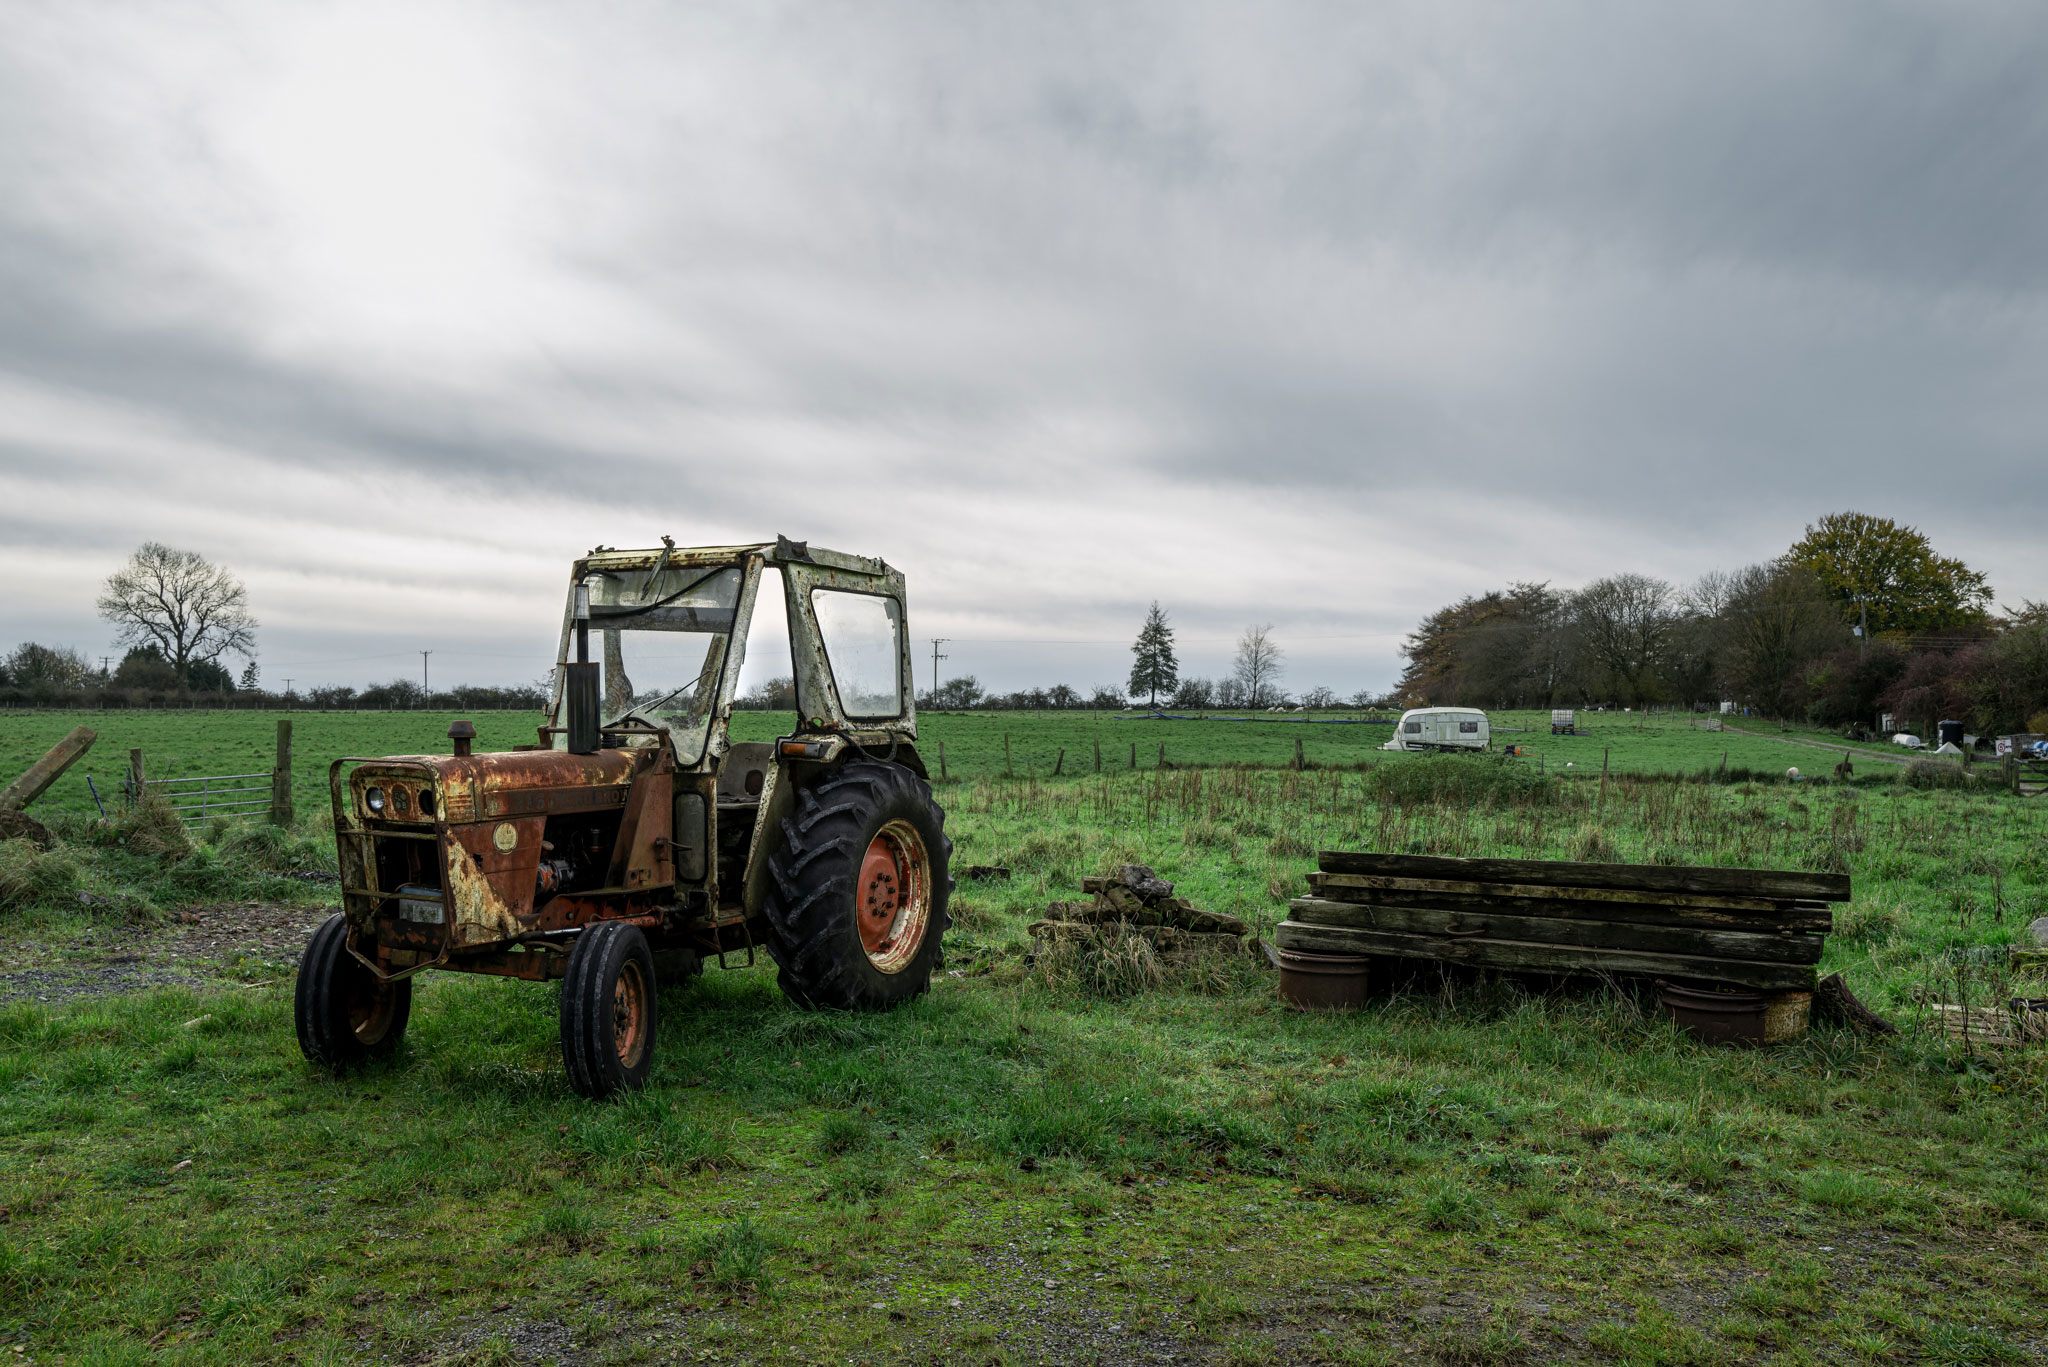 Along The Way Photographic Documentary Abandoned Tractor at a farm on the Mendip Hills